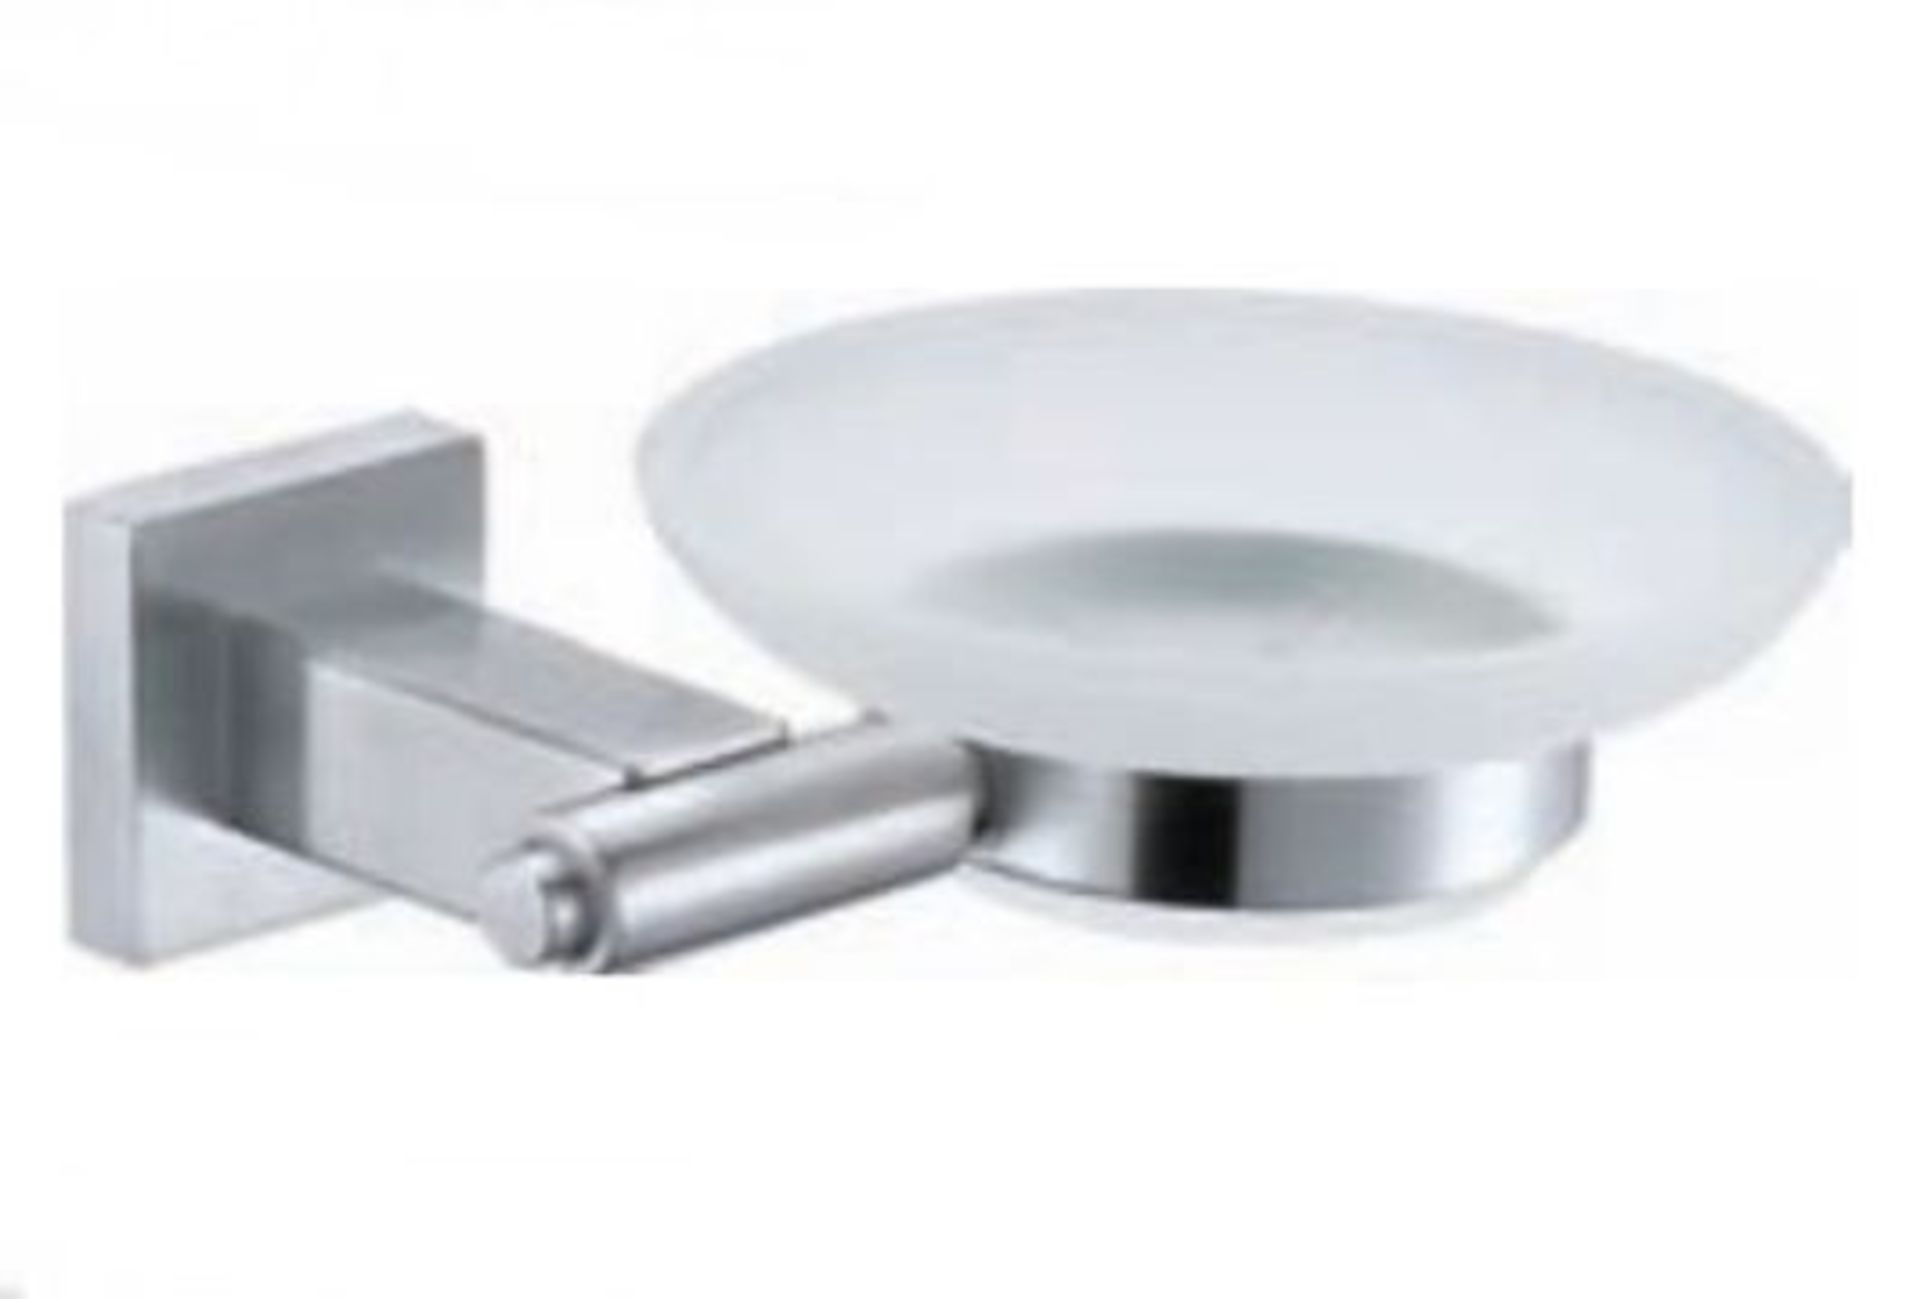 2 x Stonearth Soap Dish Holder With Frosted Glasses - Solid Stainless Steel Bathroom Accessory -